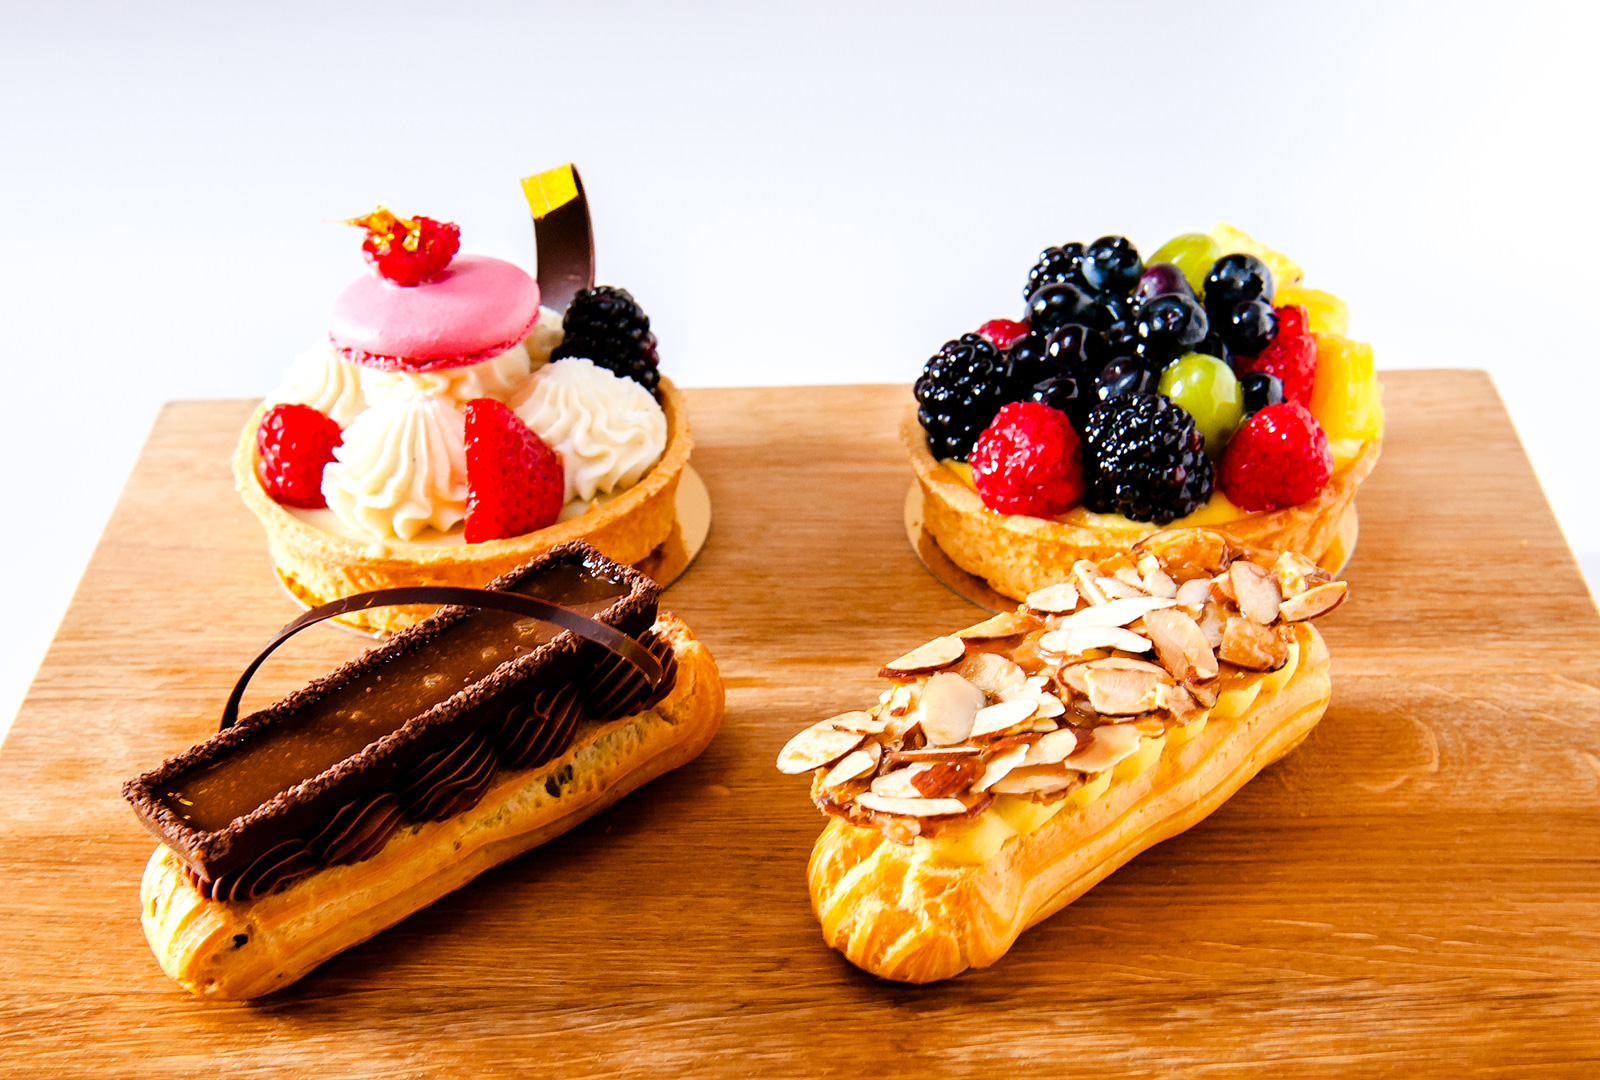 The Grand America Hotel 4-Piece Confection Collection From In-House Patisserie